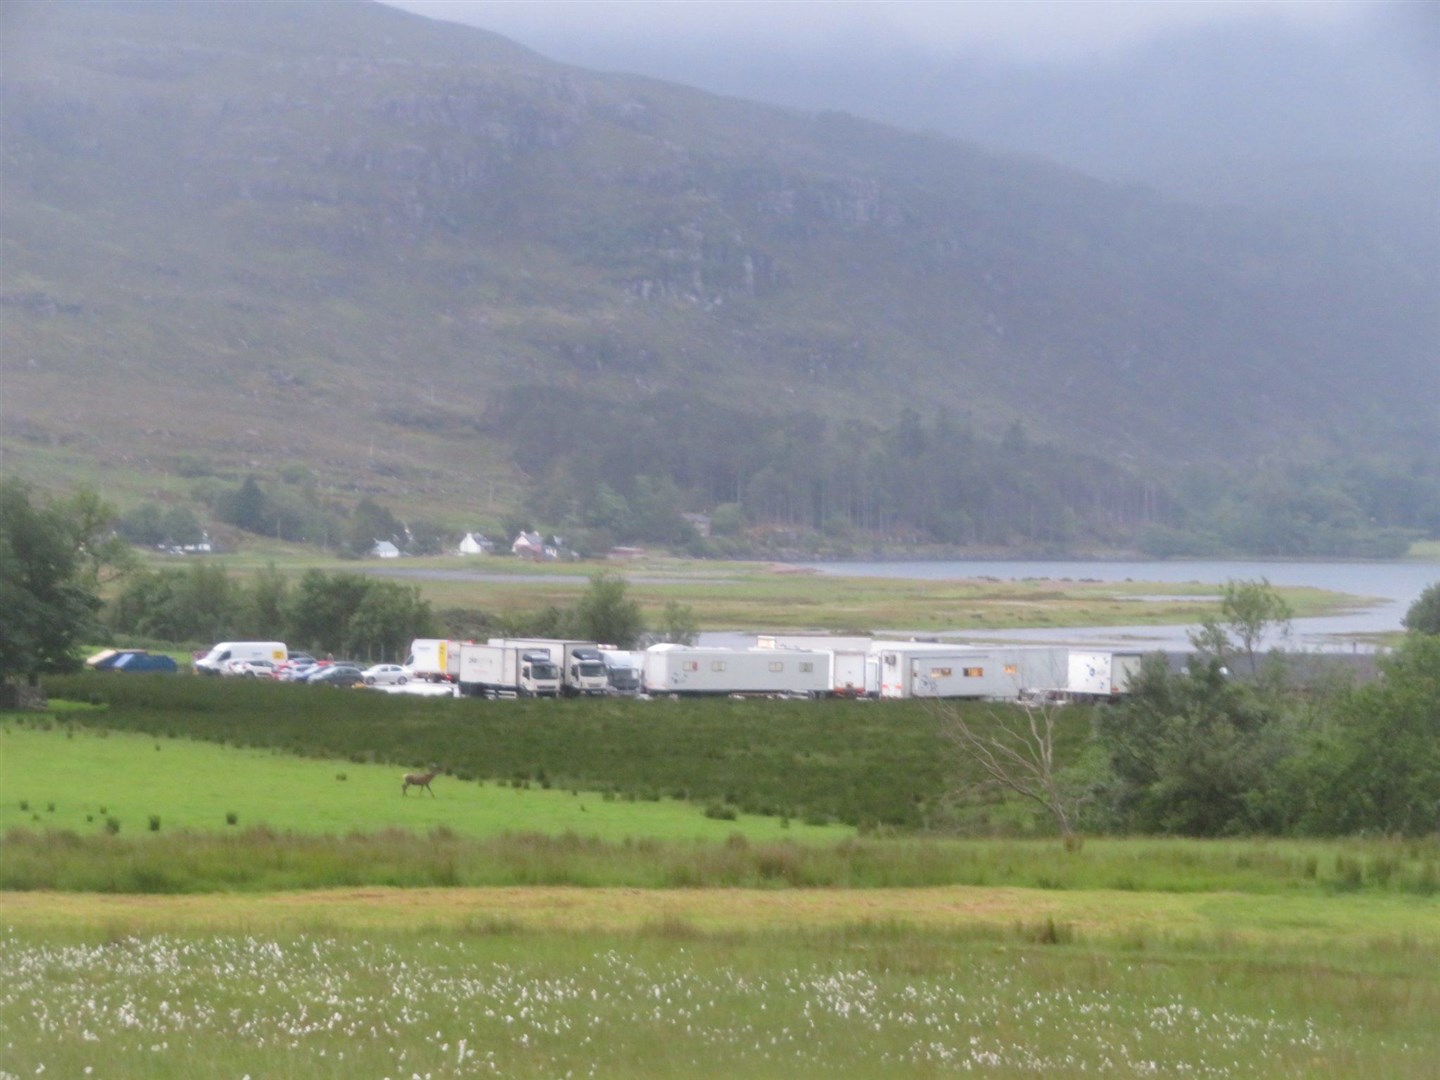 Trucks associated with the TV crew. Credit: Torridon and Kinlochewe Community News and Views.